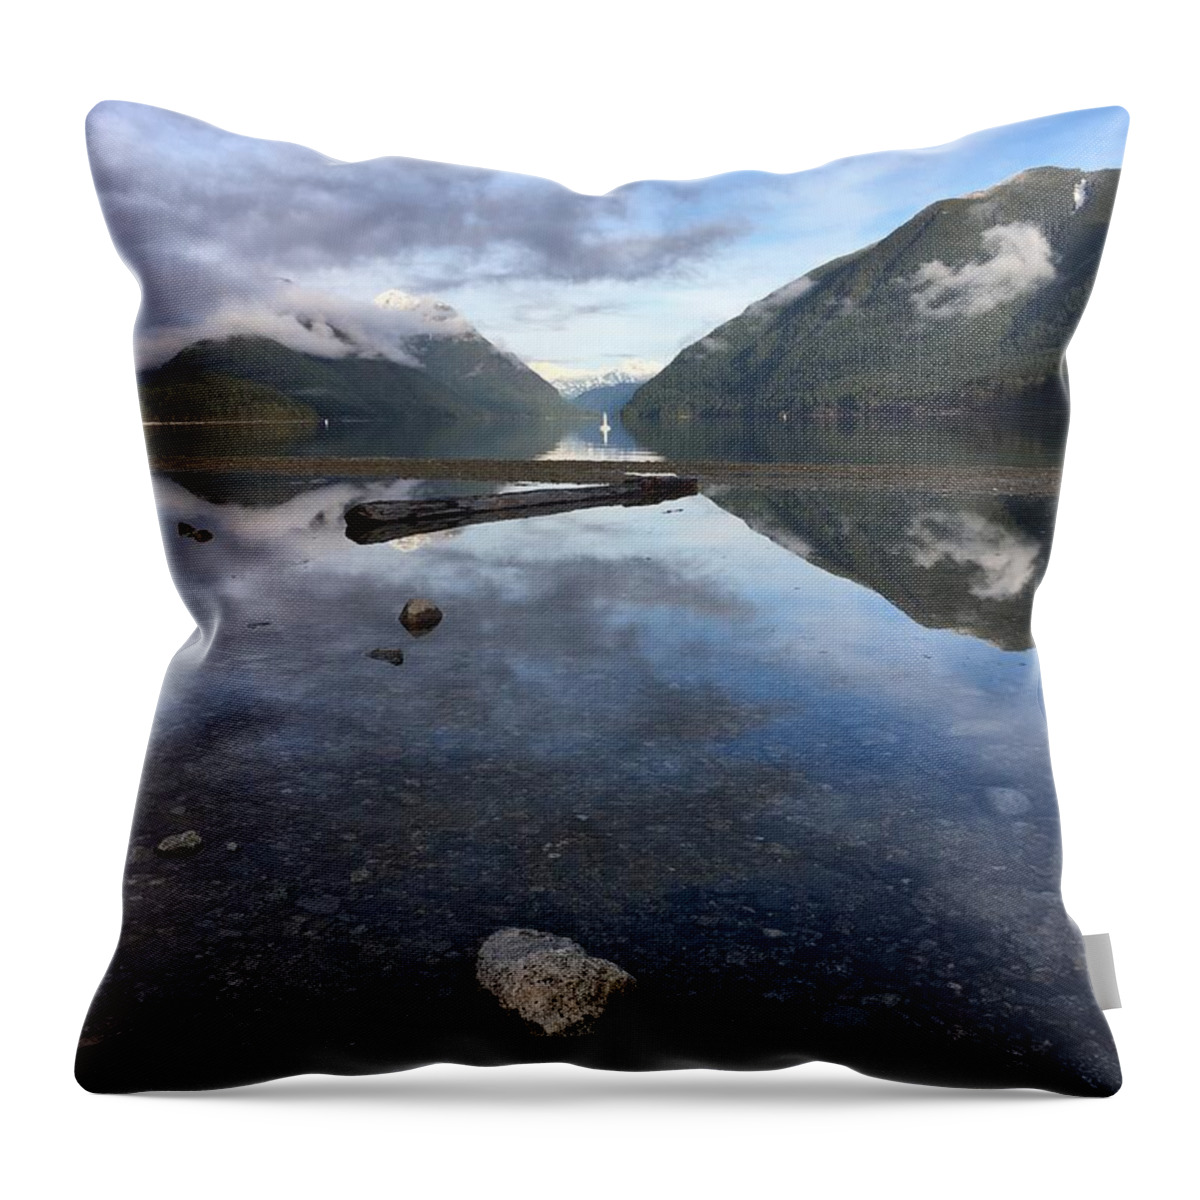 Alouette Throw Pillow featuring the photograph Reflections Alouette Lake - Golden Ears Park, British Columbia by Ian McAdie